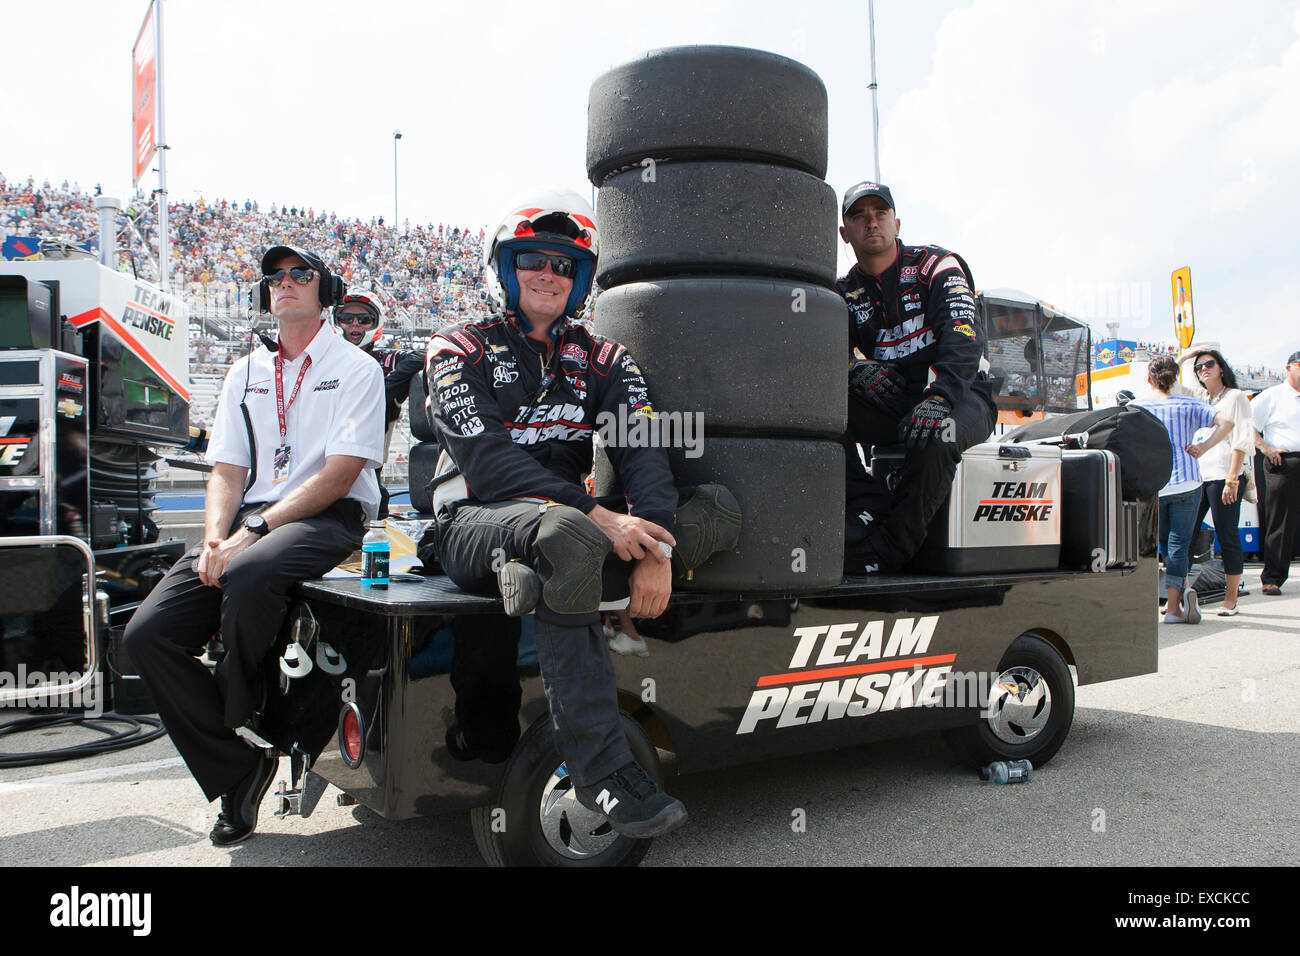 Indy car pit crew working during an IndyCar Series race. Stock Photo